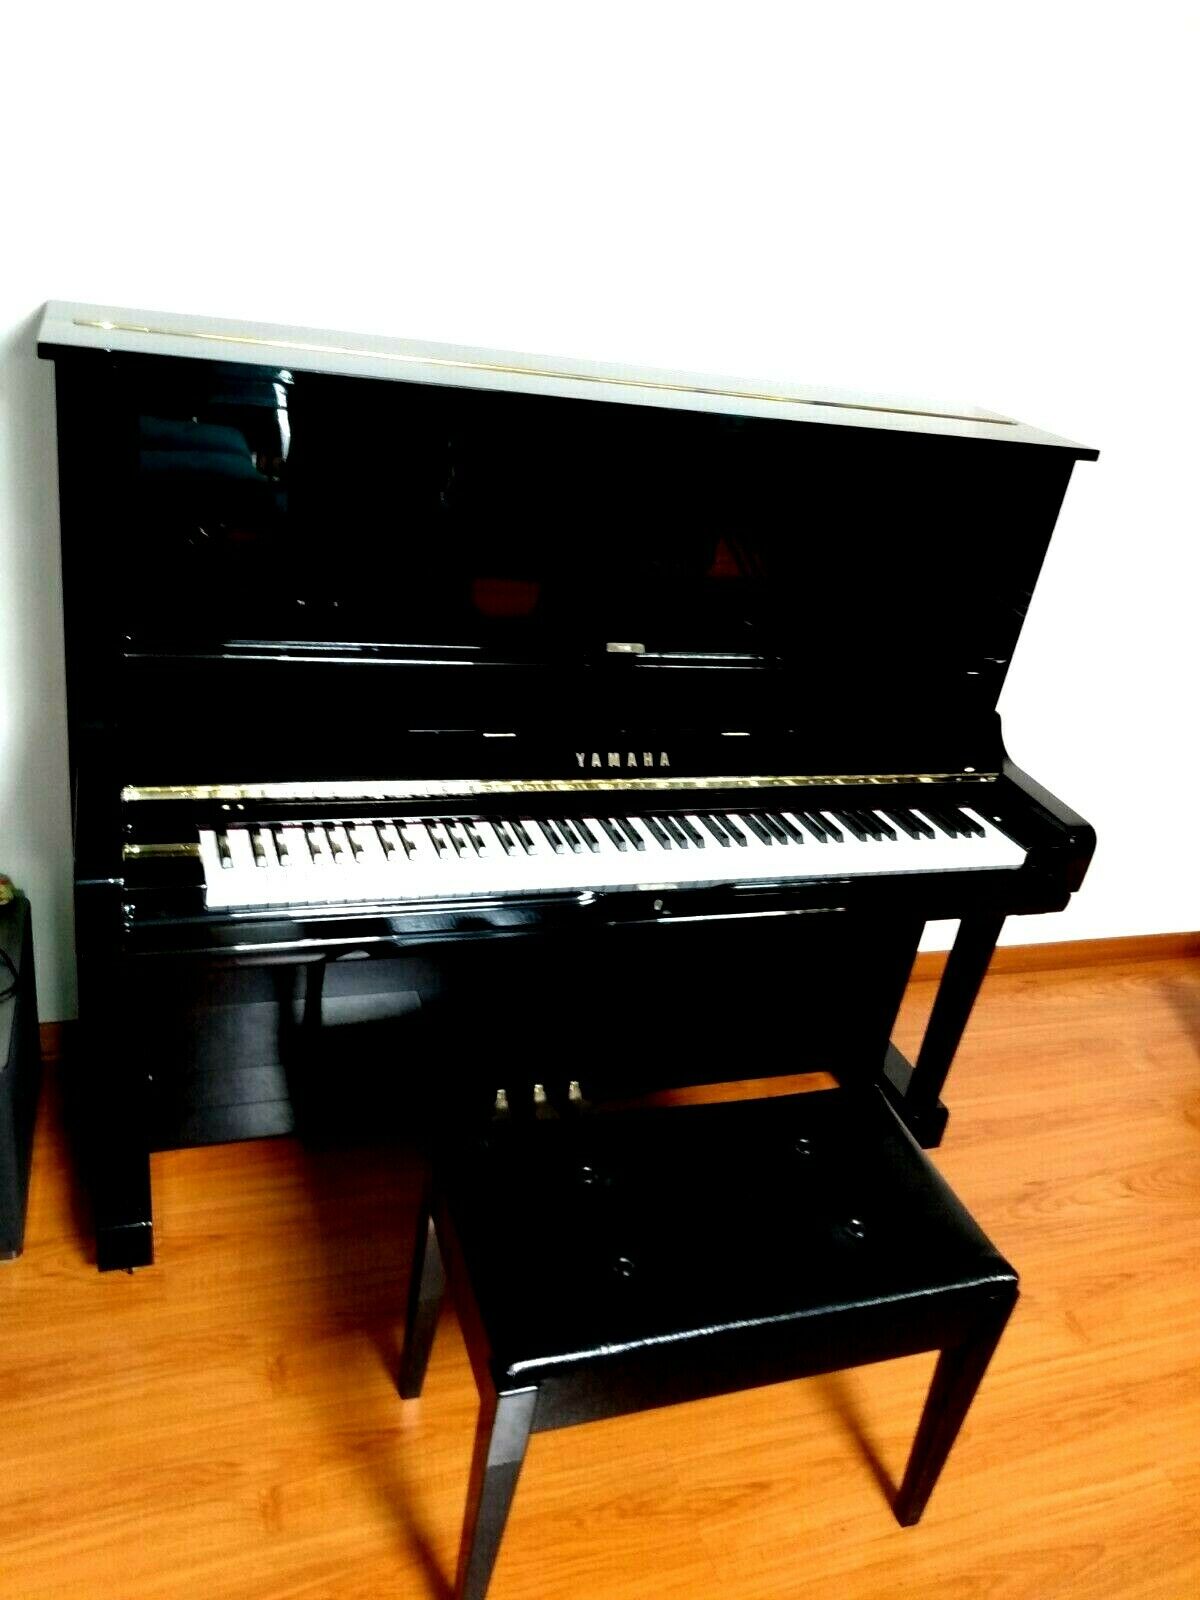 Yamaha U3 52" Upright Piano  With Silent System / Quiet Time /midi/ Bluetooth